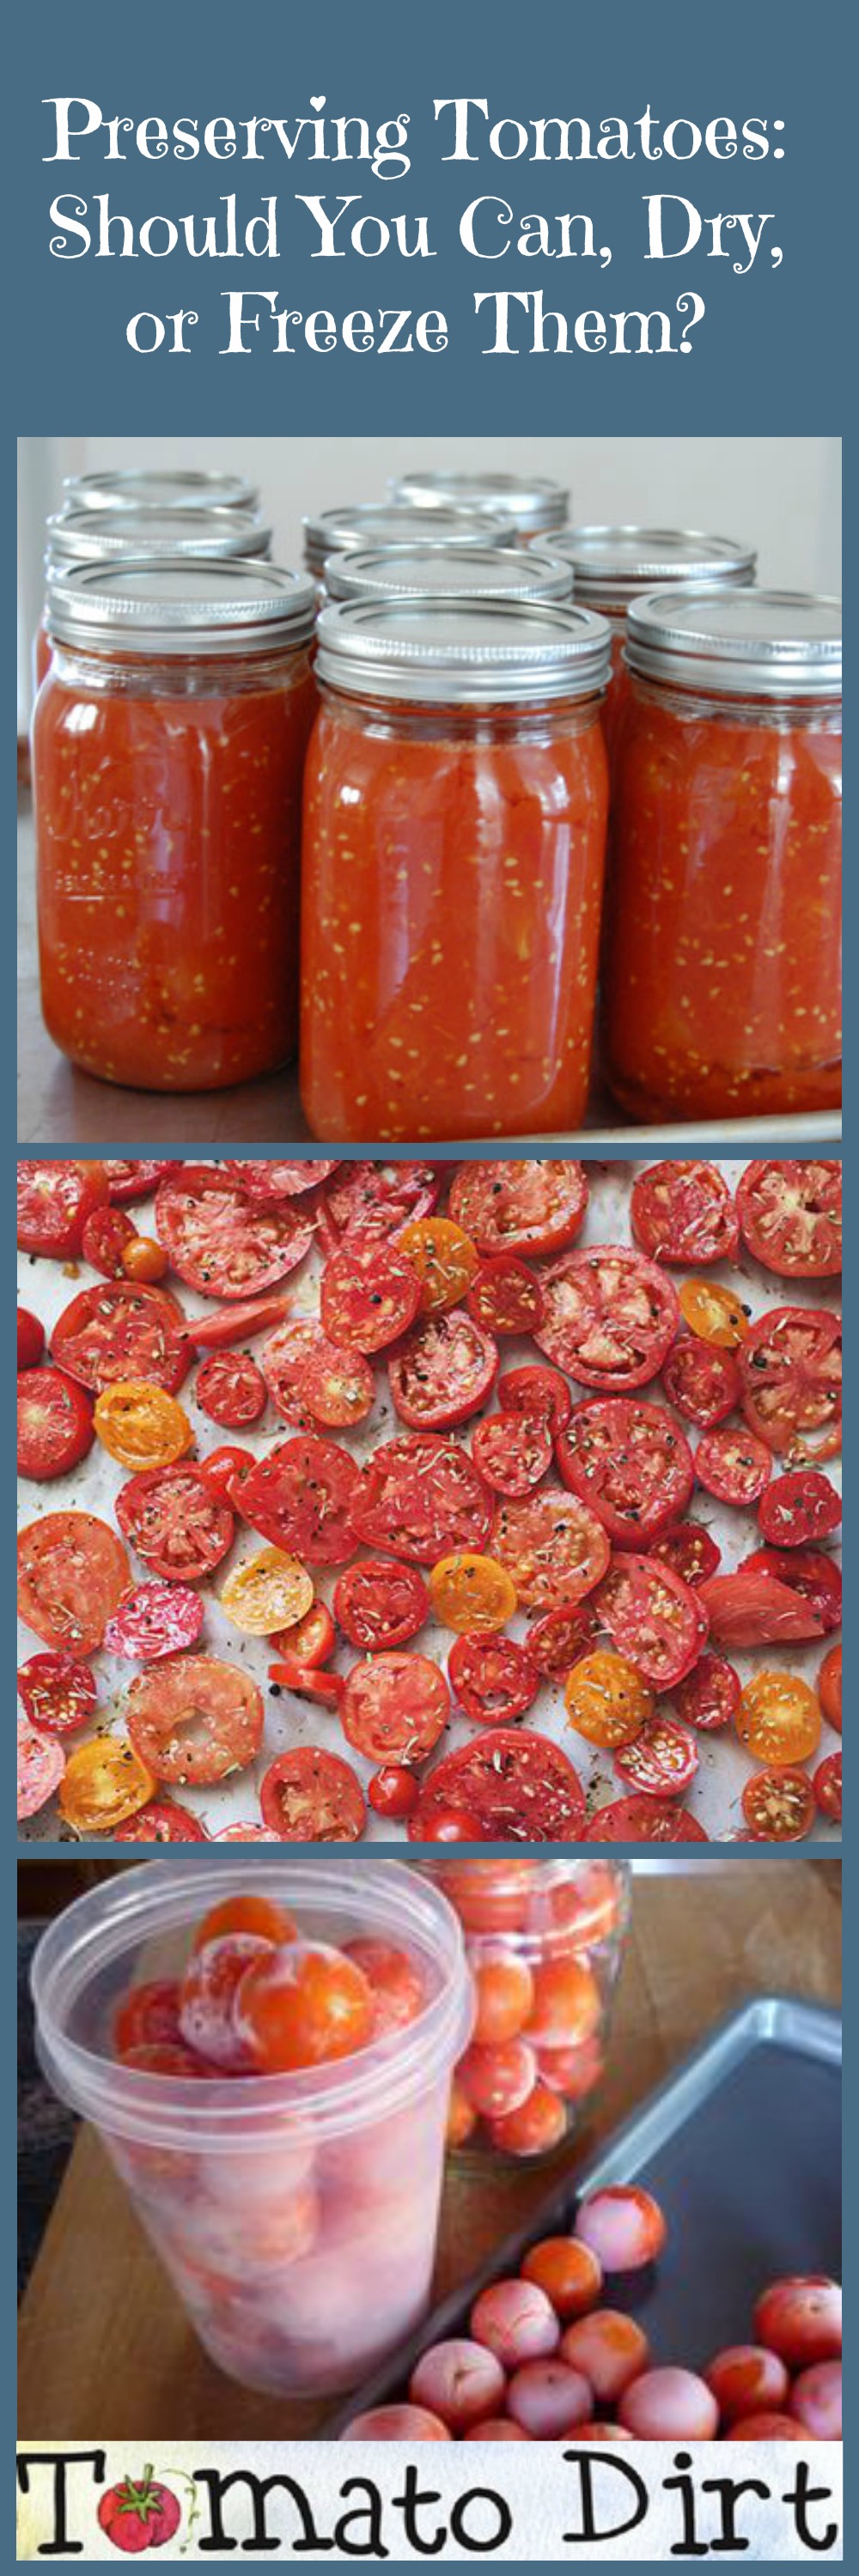 Preserving Tomatoes: should I can, dry, or freeze them? Benefits and drawbacks of each with Tomato Dirt.